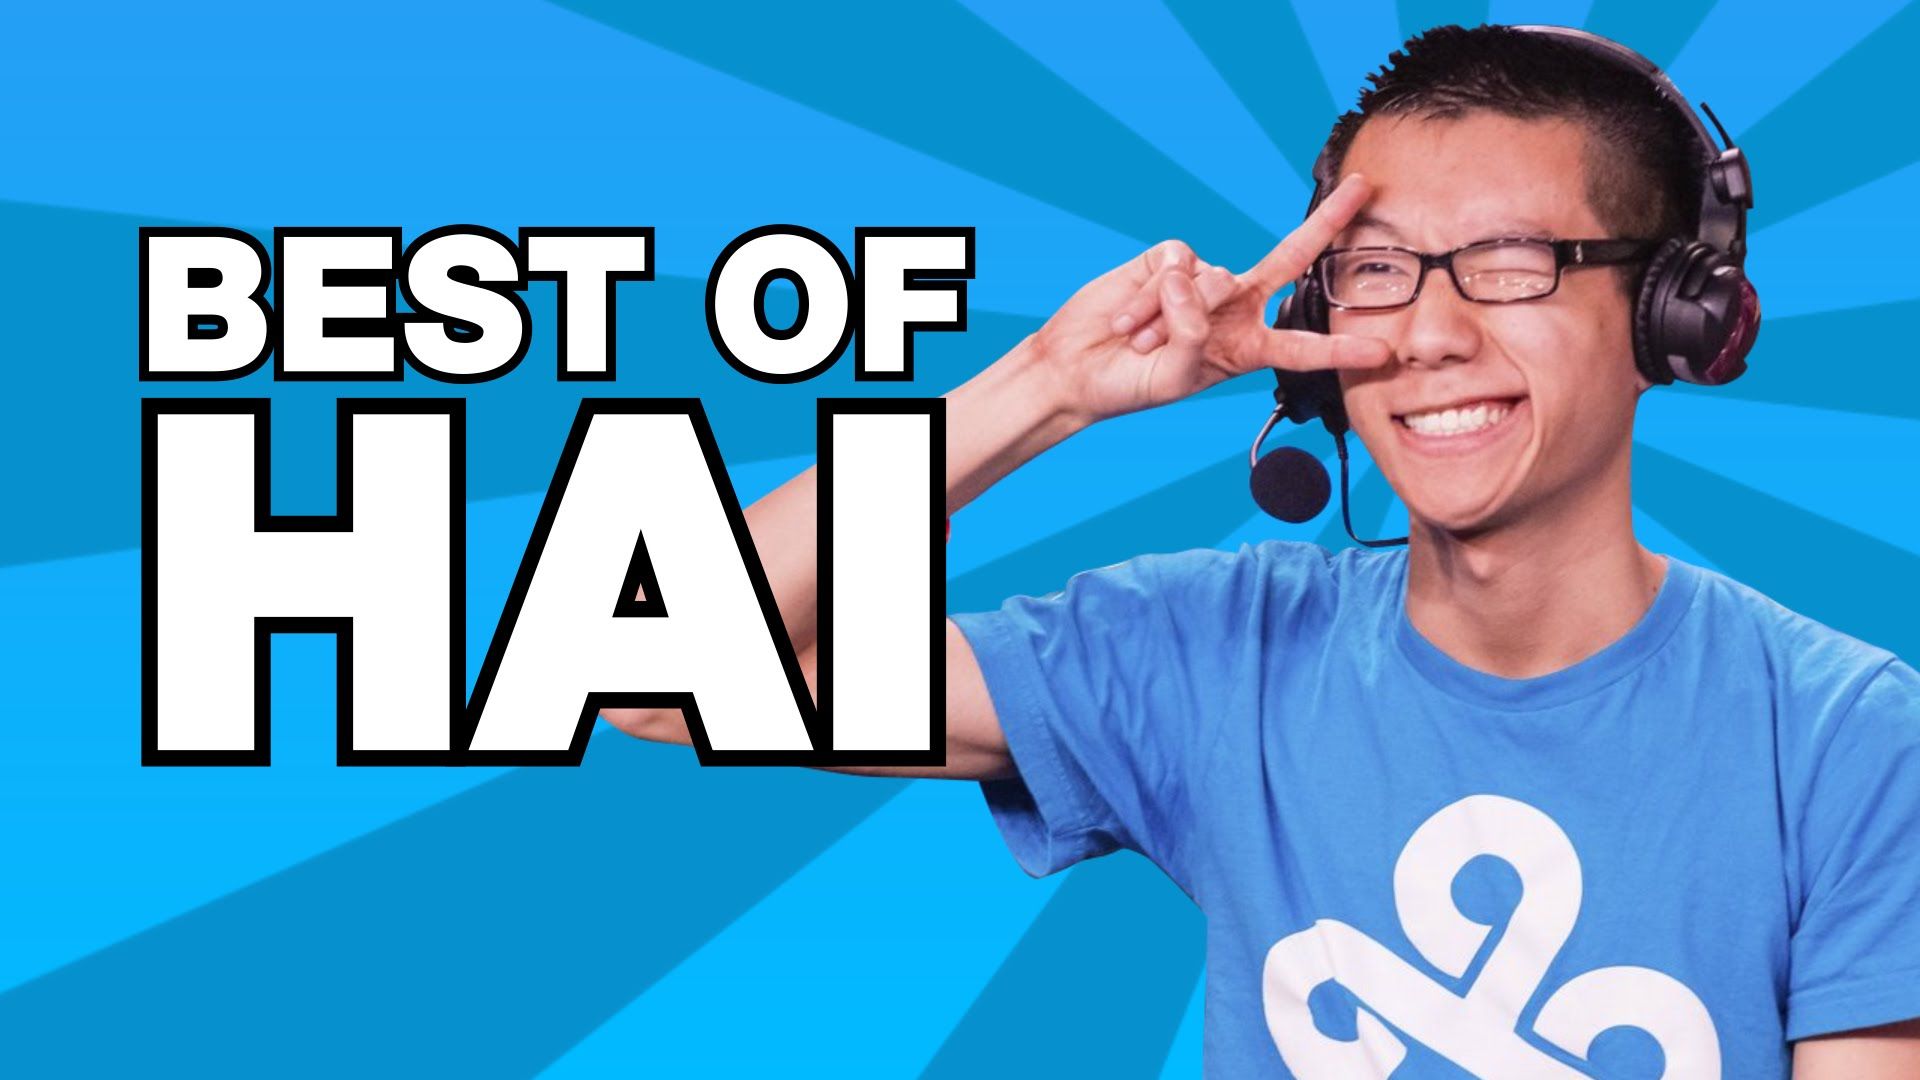 Songs in Best of Hai Former Pro Player & Shotcalling Legend